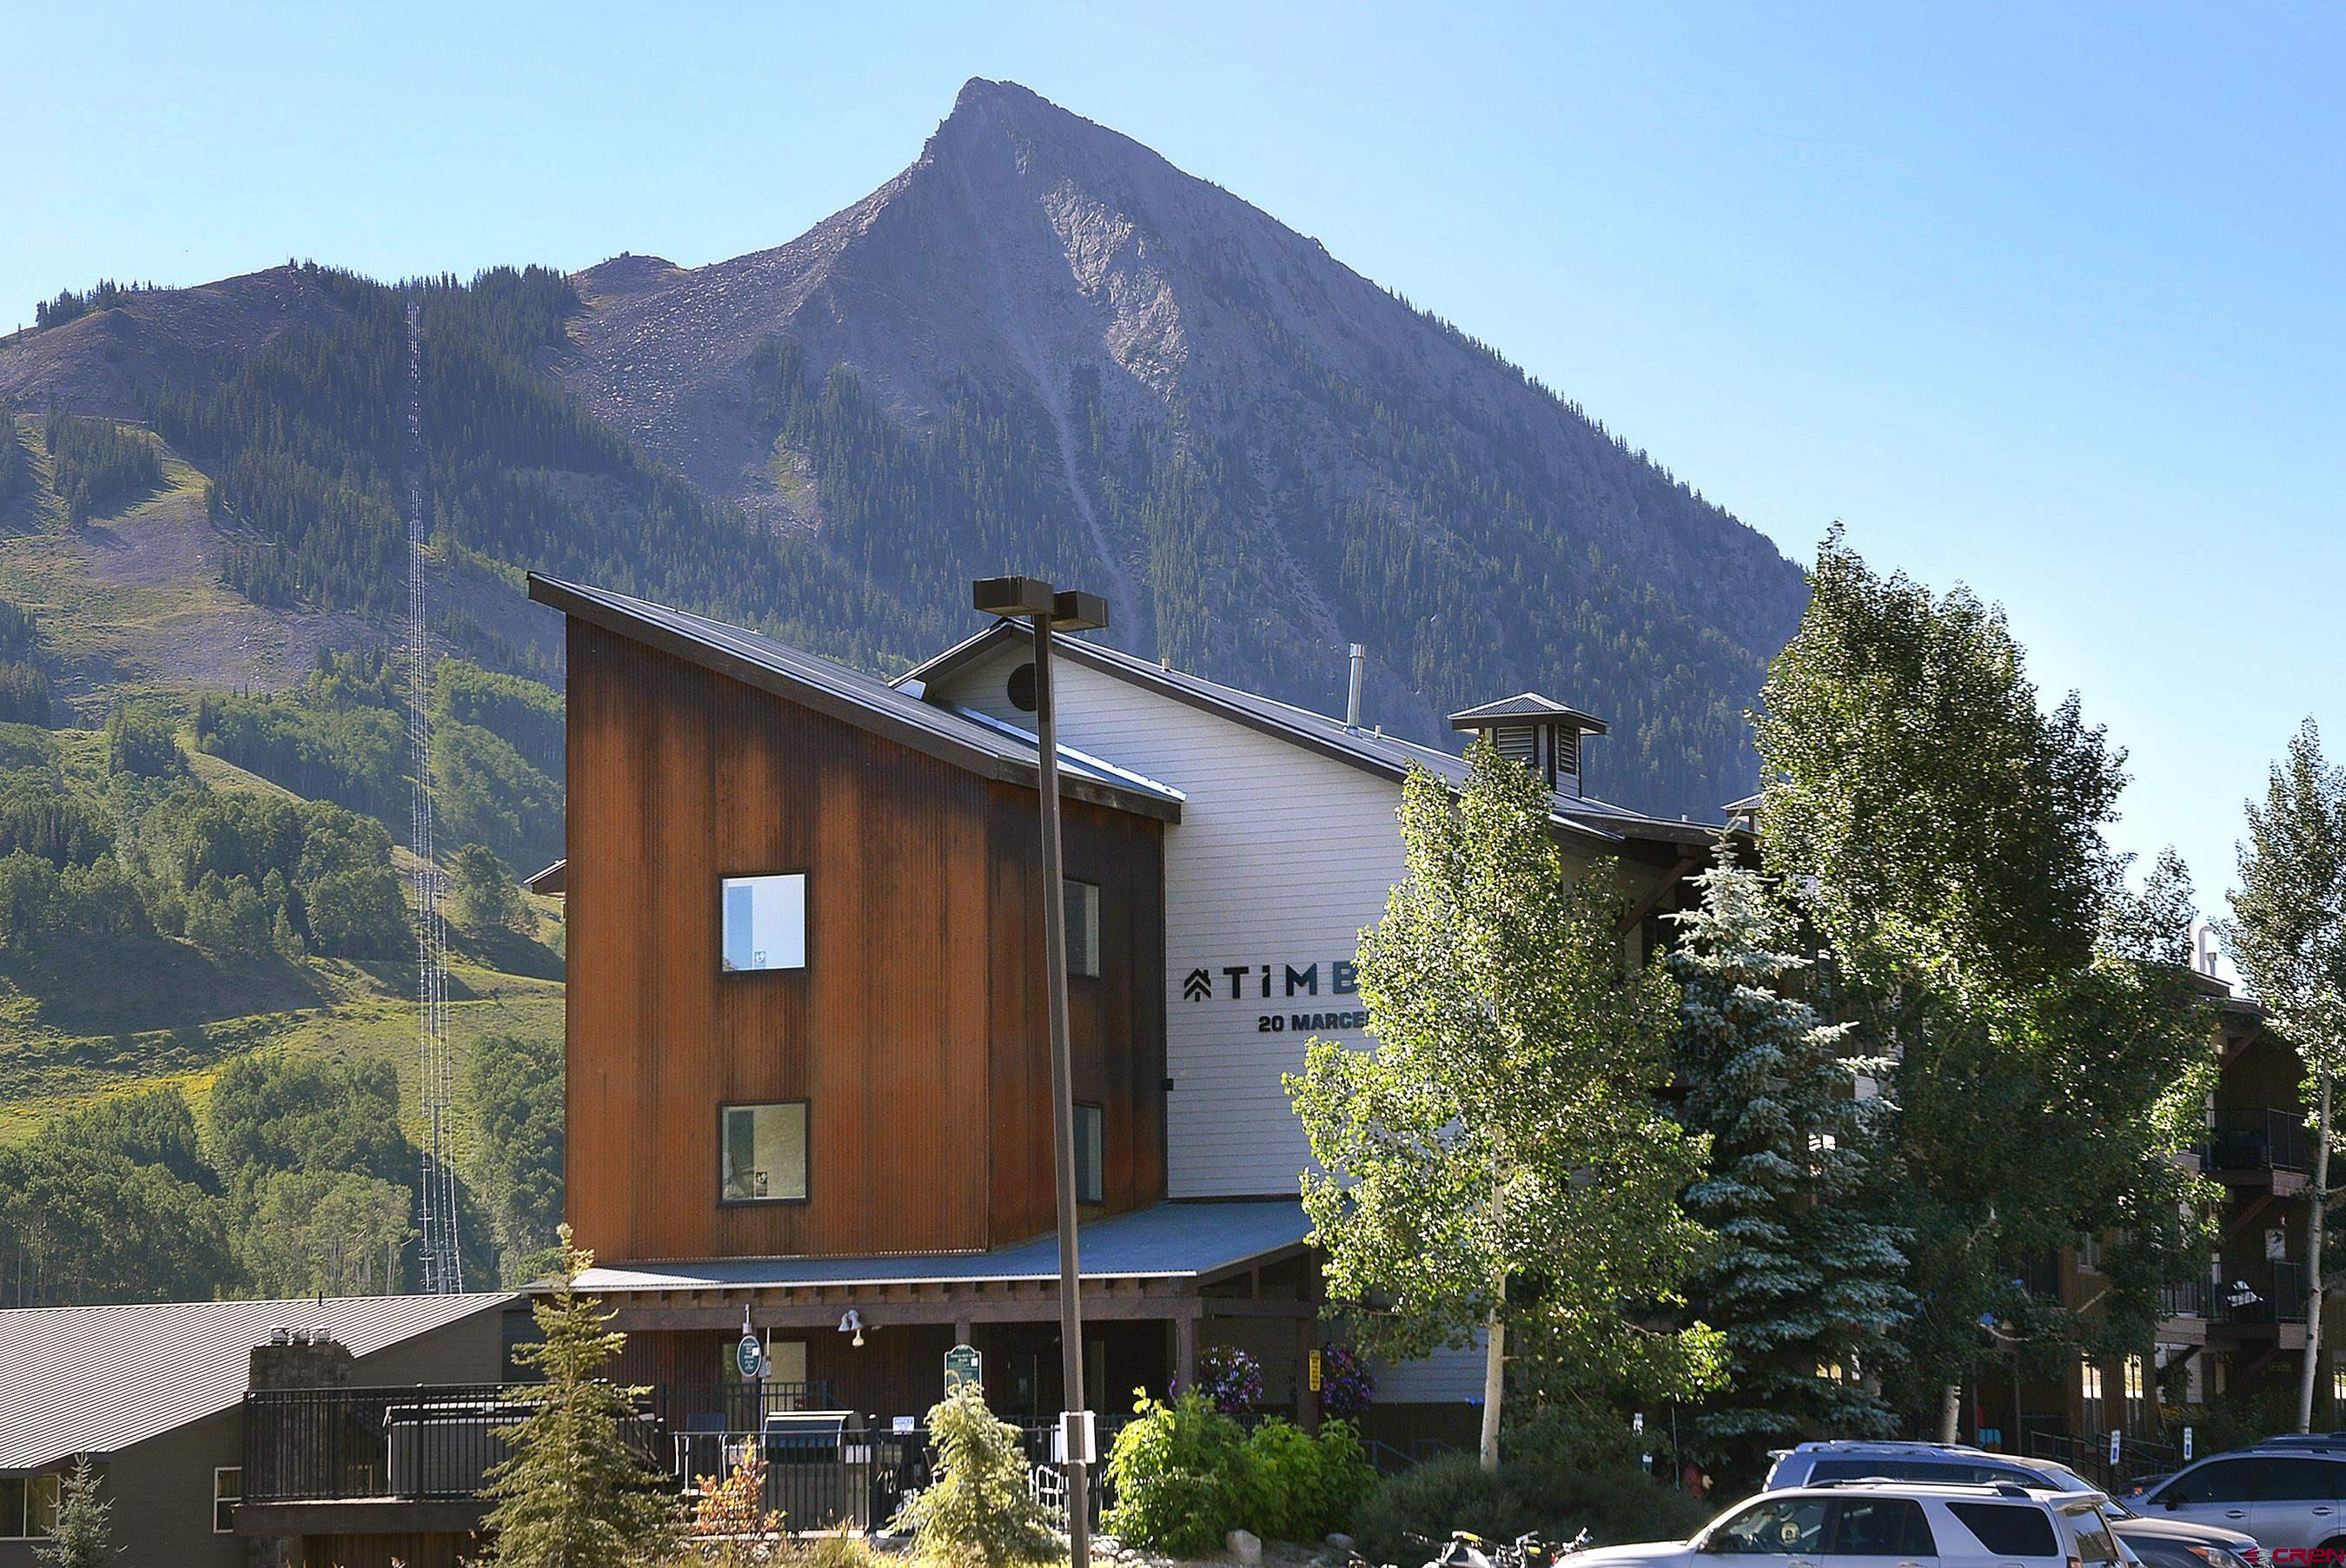 20 Marcellina Lane, Mt. Crested Butte, CO 81225